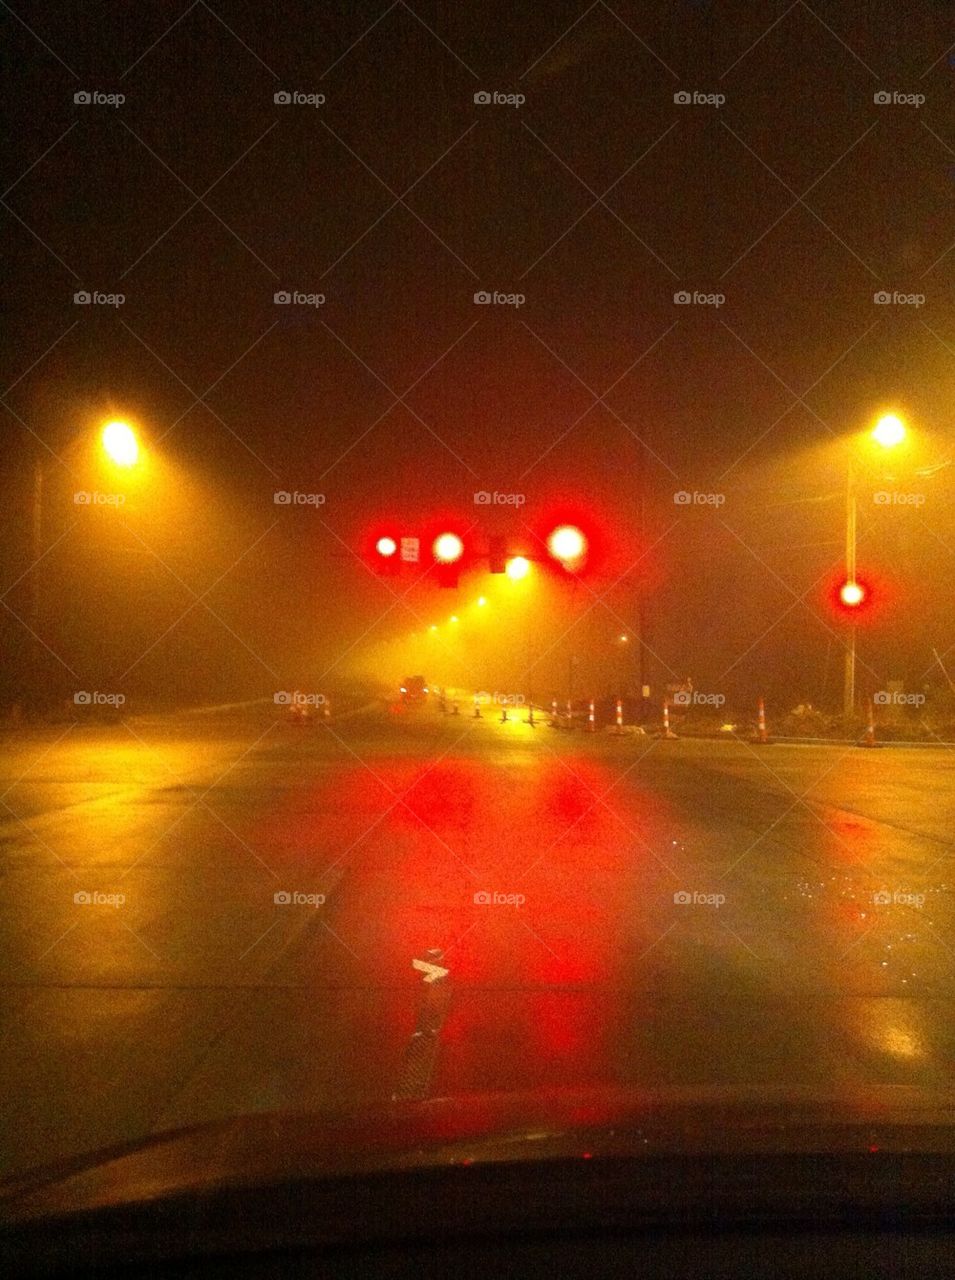 Foggy night at the stop light.